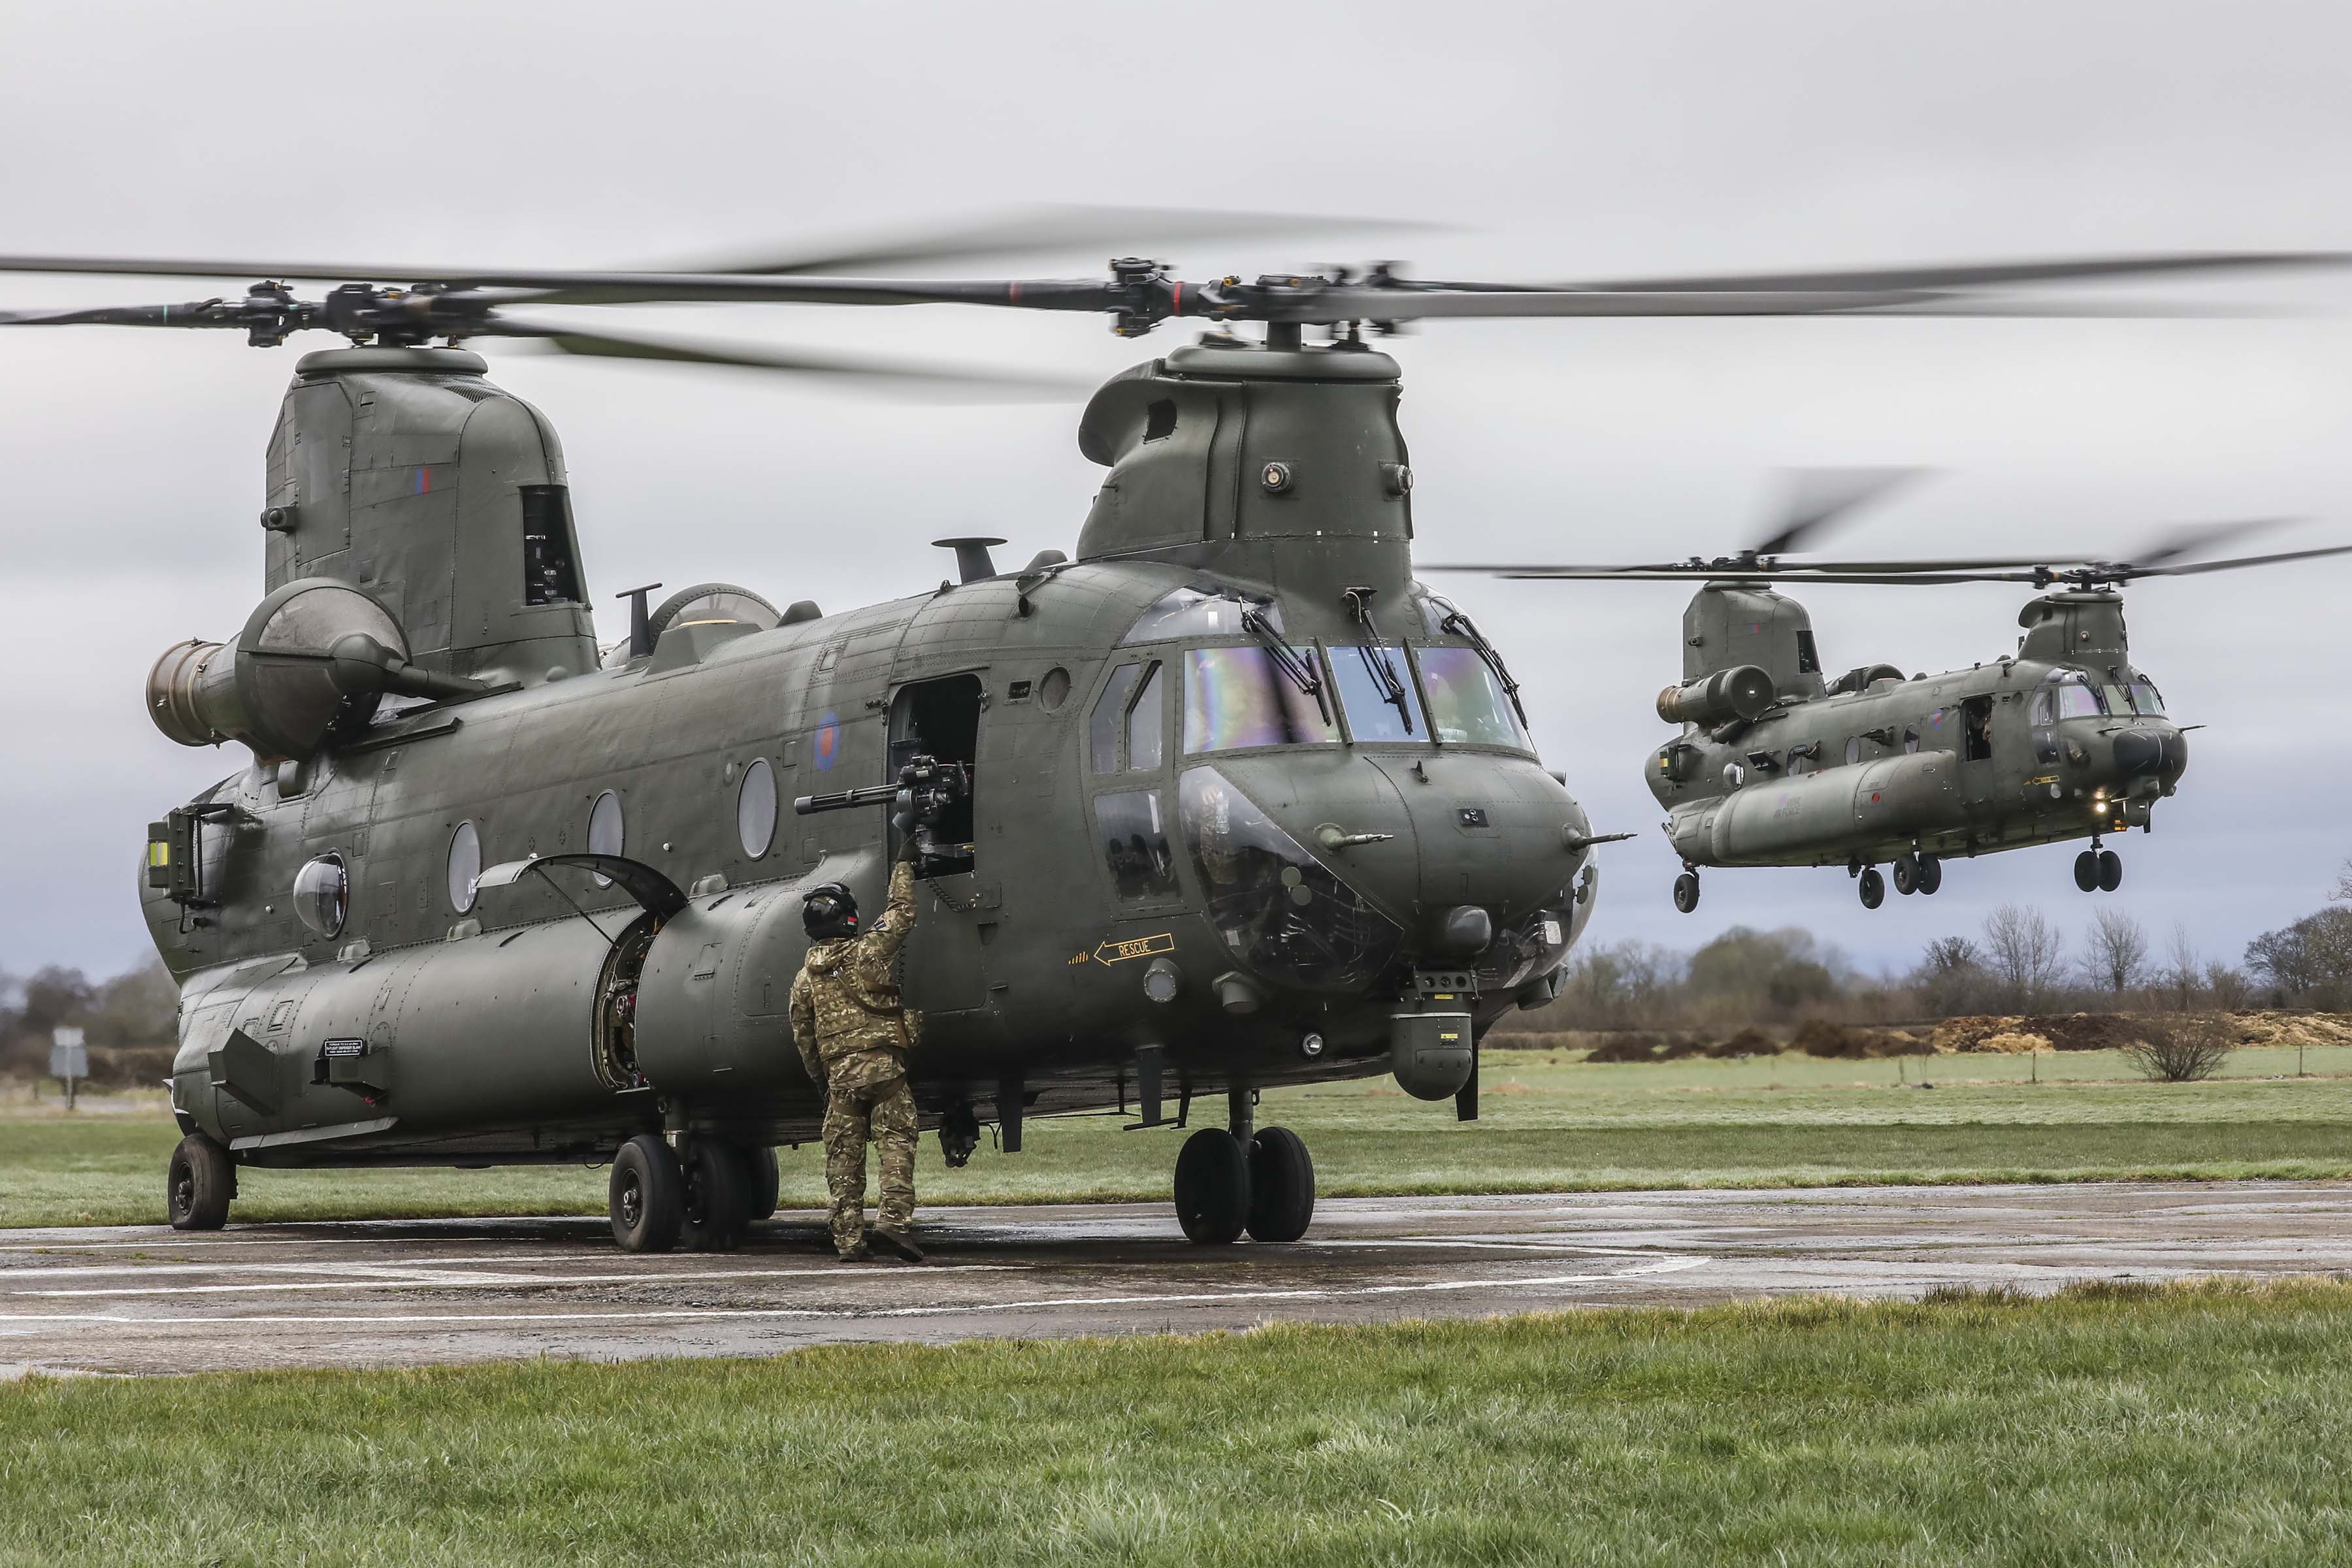 Image shows Chinook helicopters coming into land on the airfield.